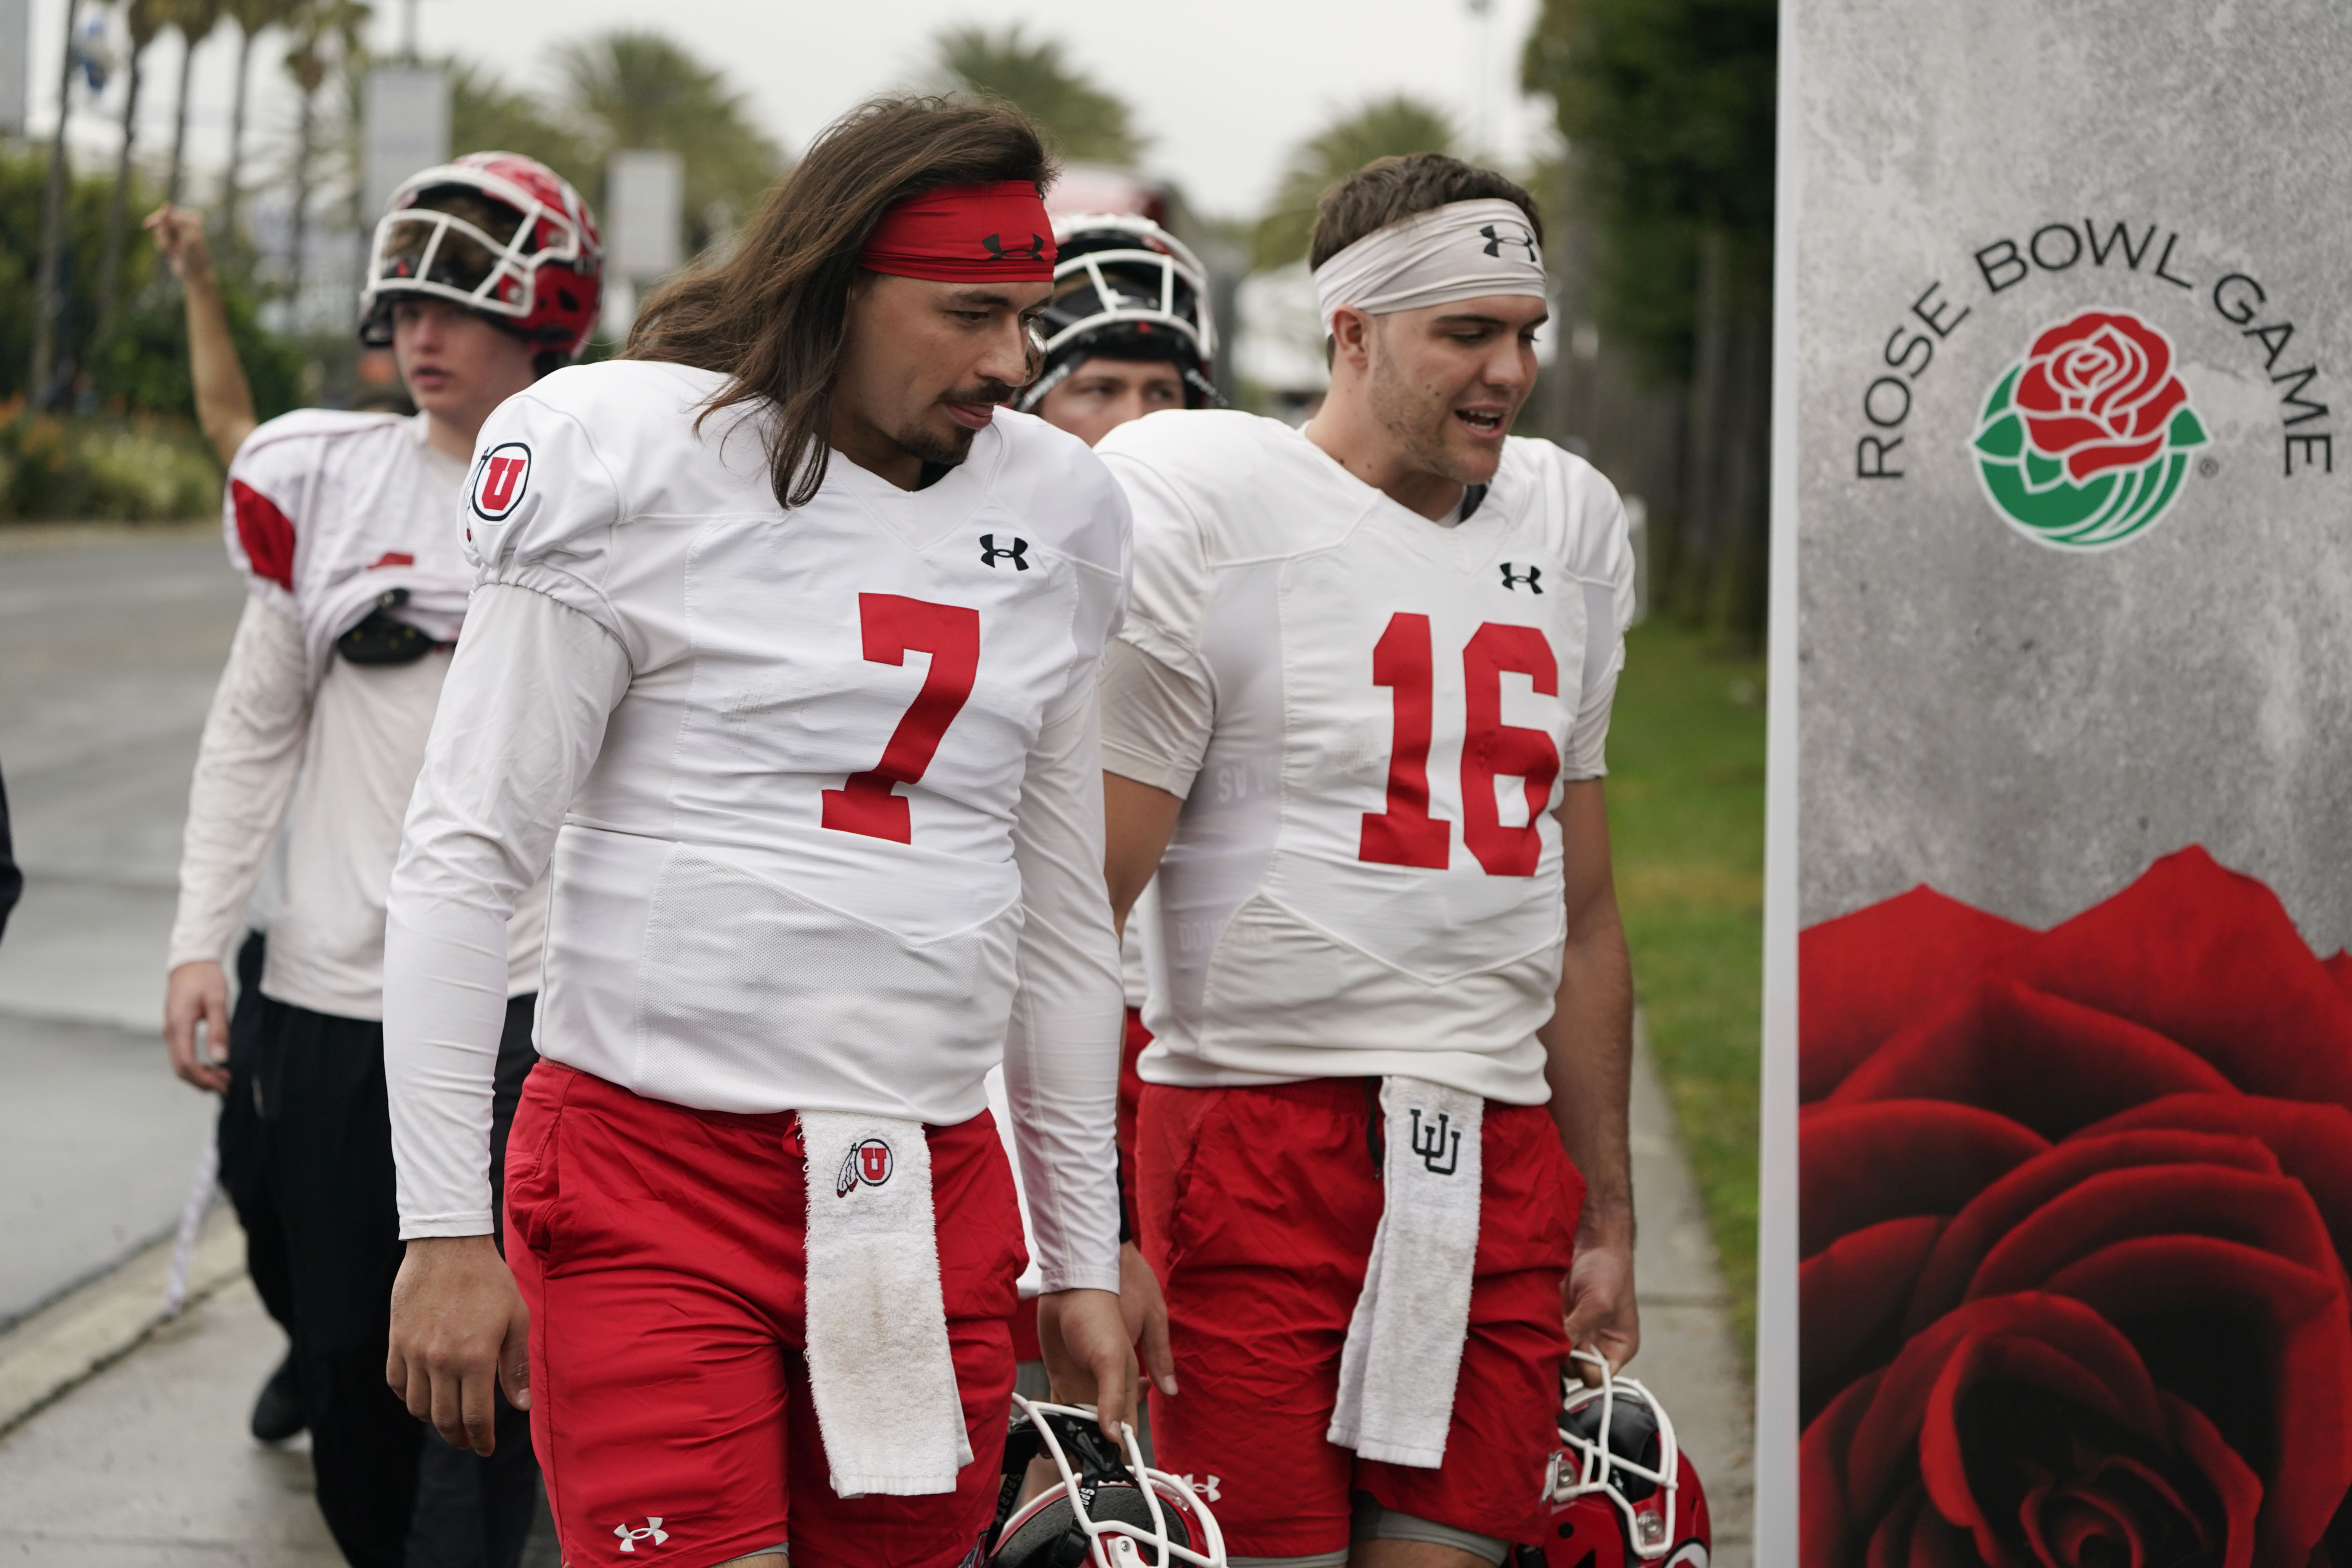 Utah football depth chart is out — who are QB1 and QB2?